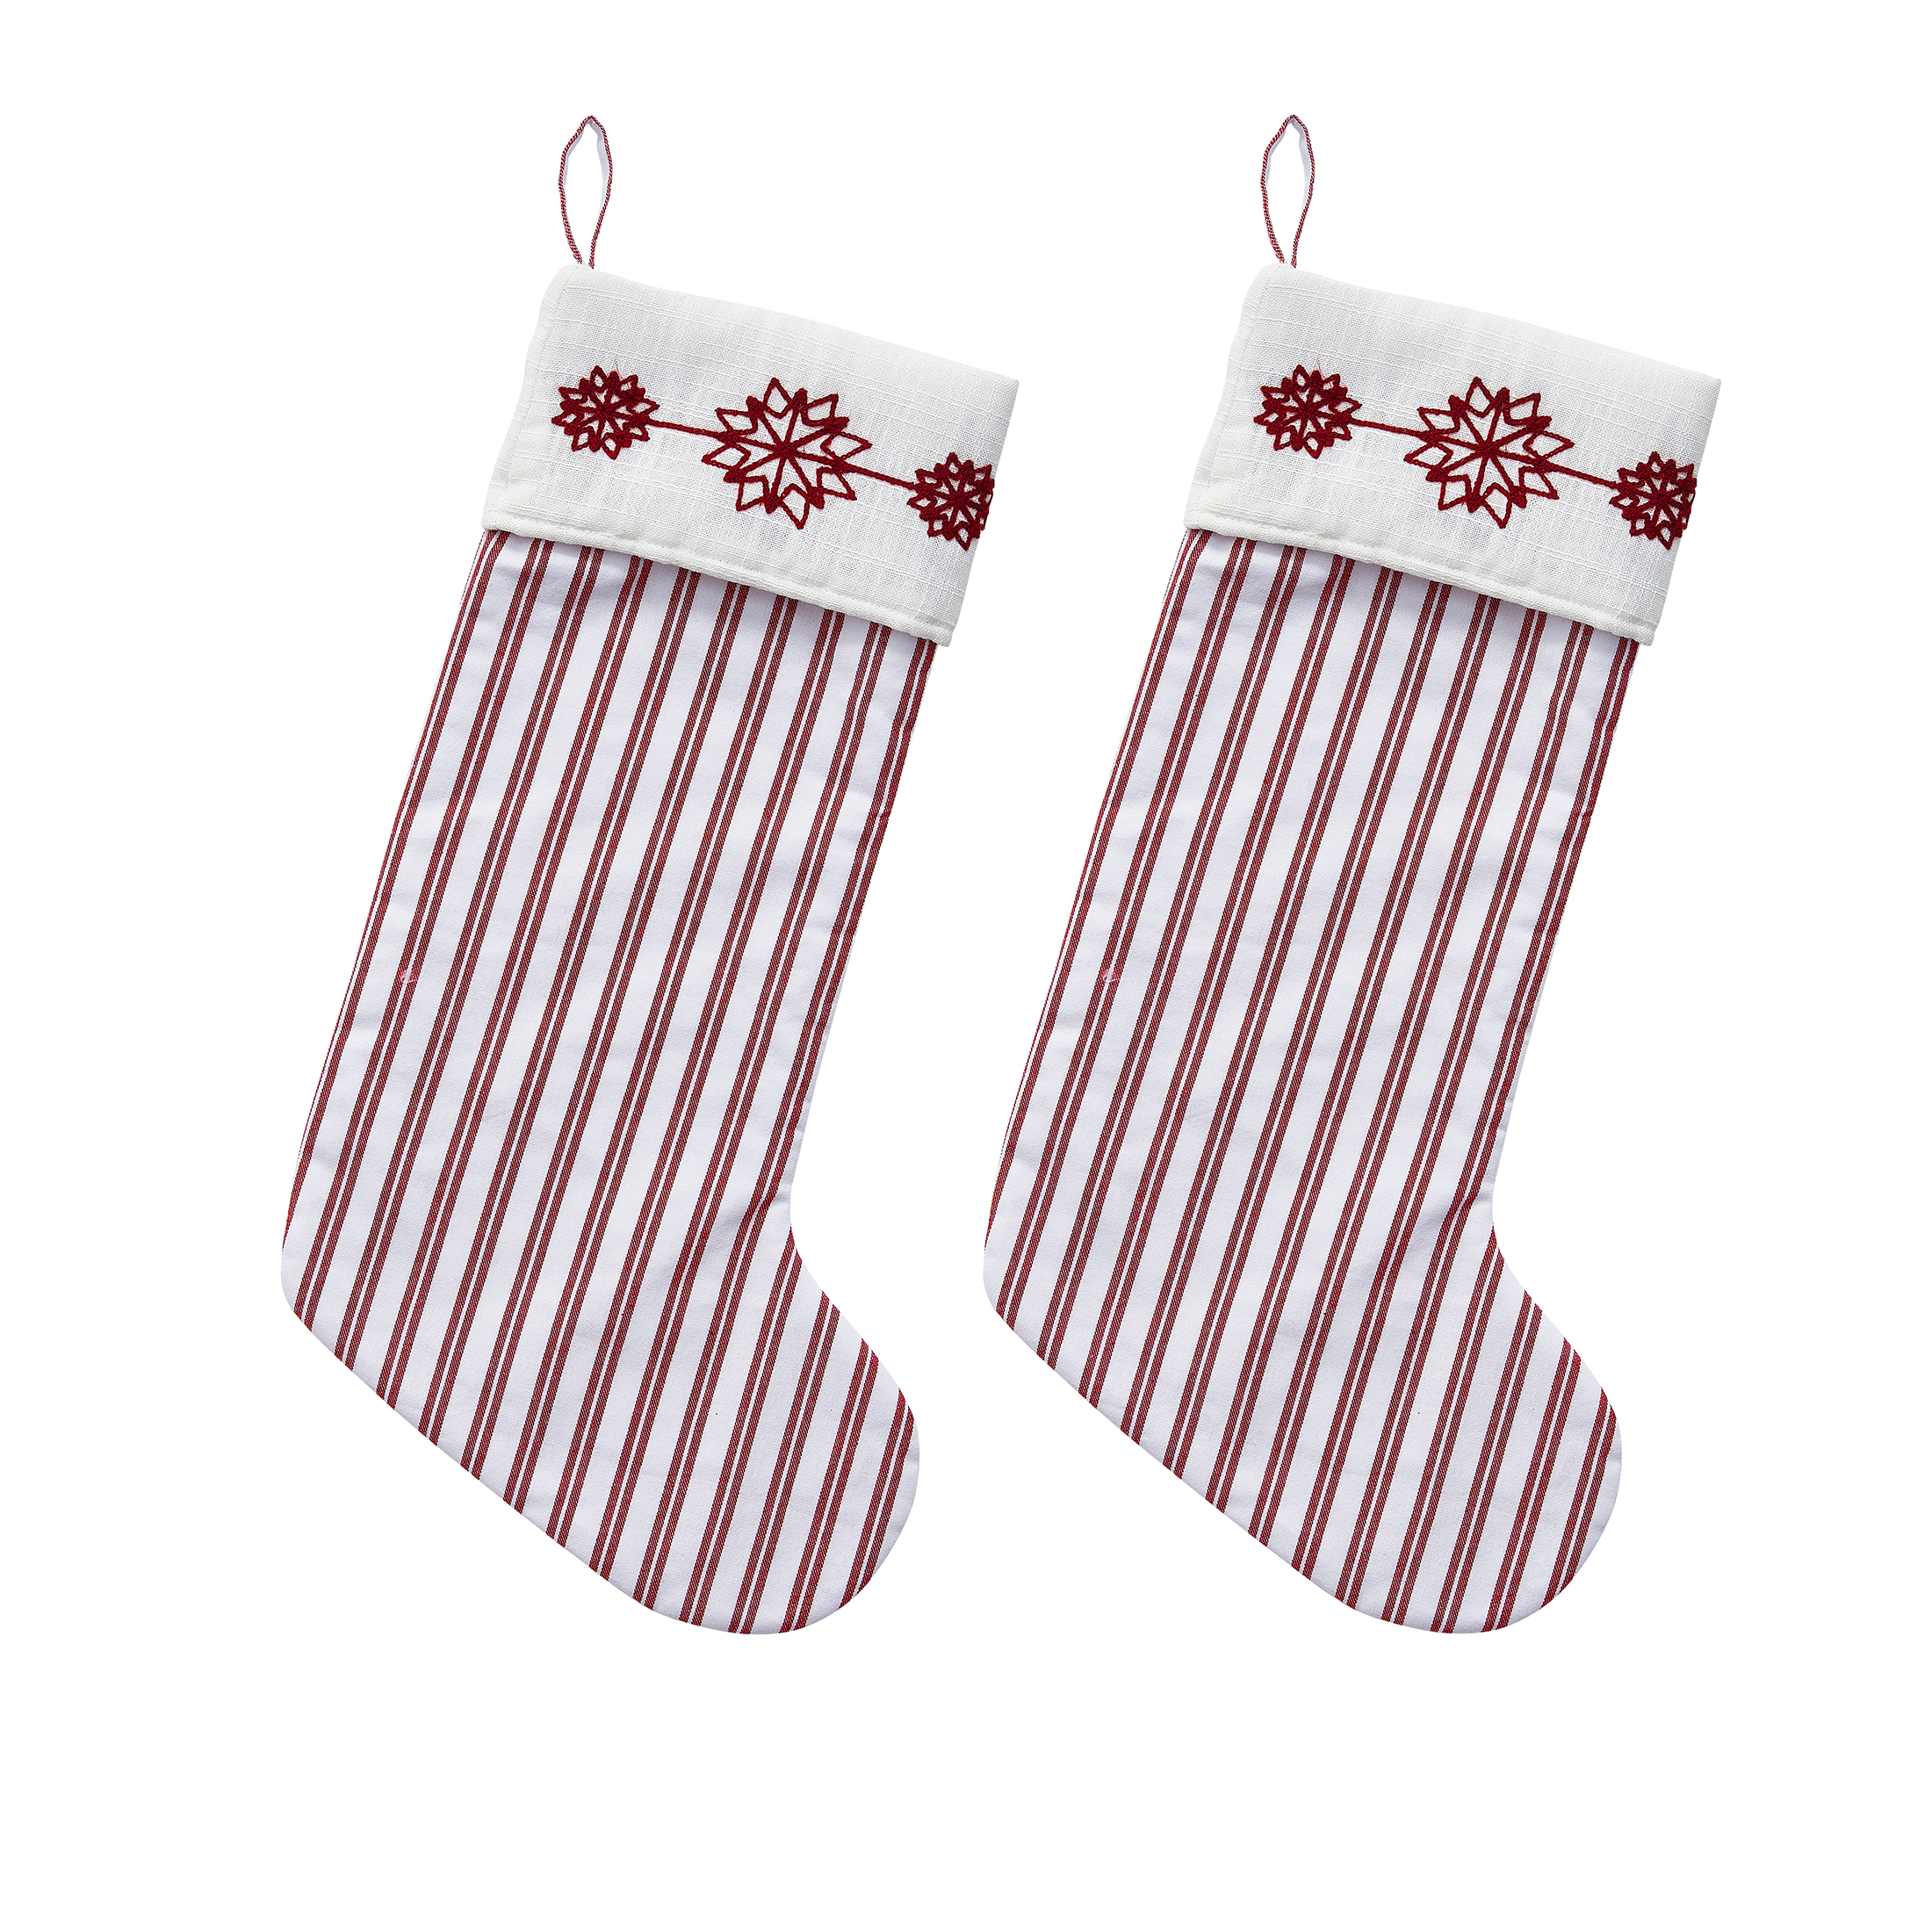 My Texas House Fallon Red Snowflake Christmas Stockings, 21" (2 Count) - image 1 of 6